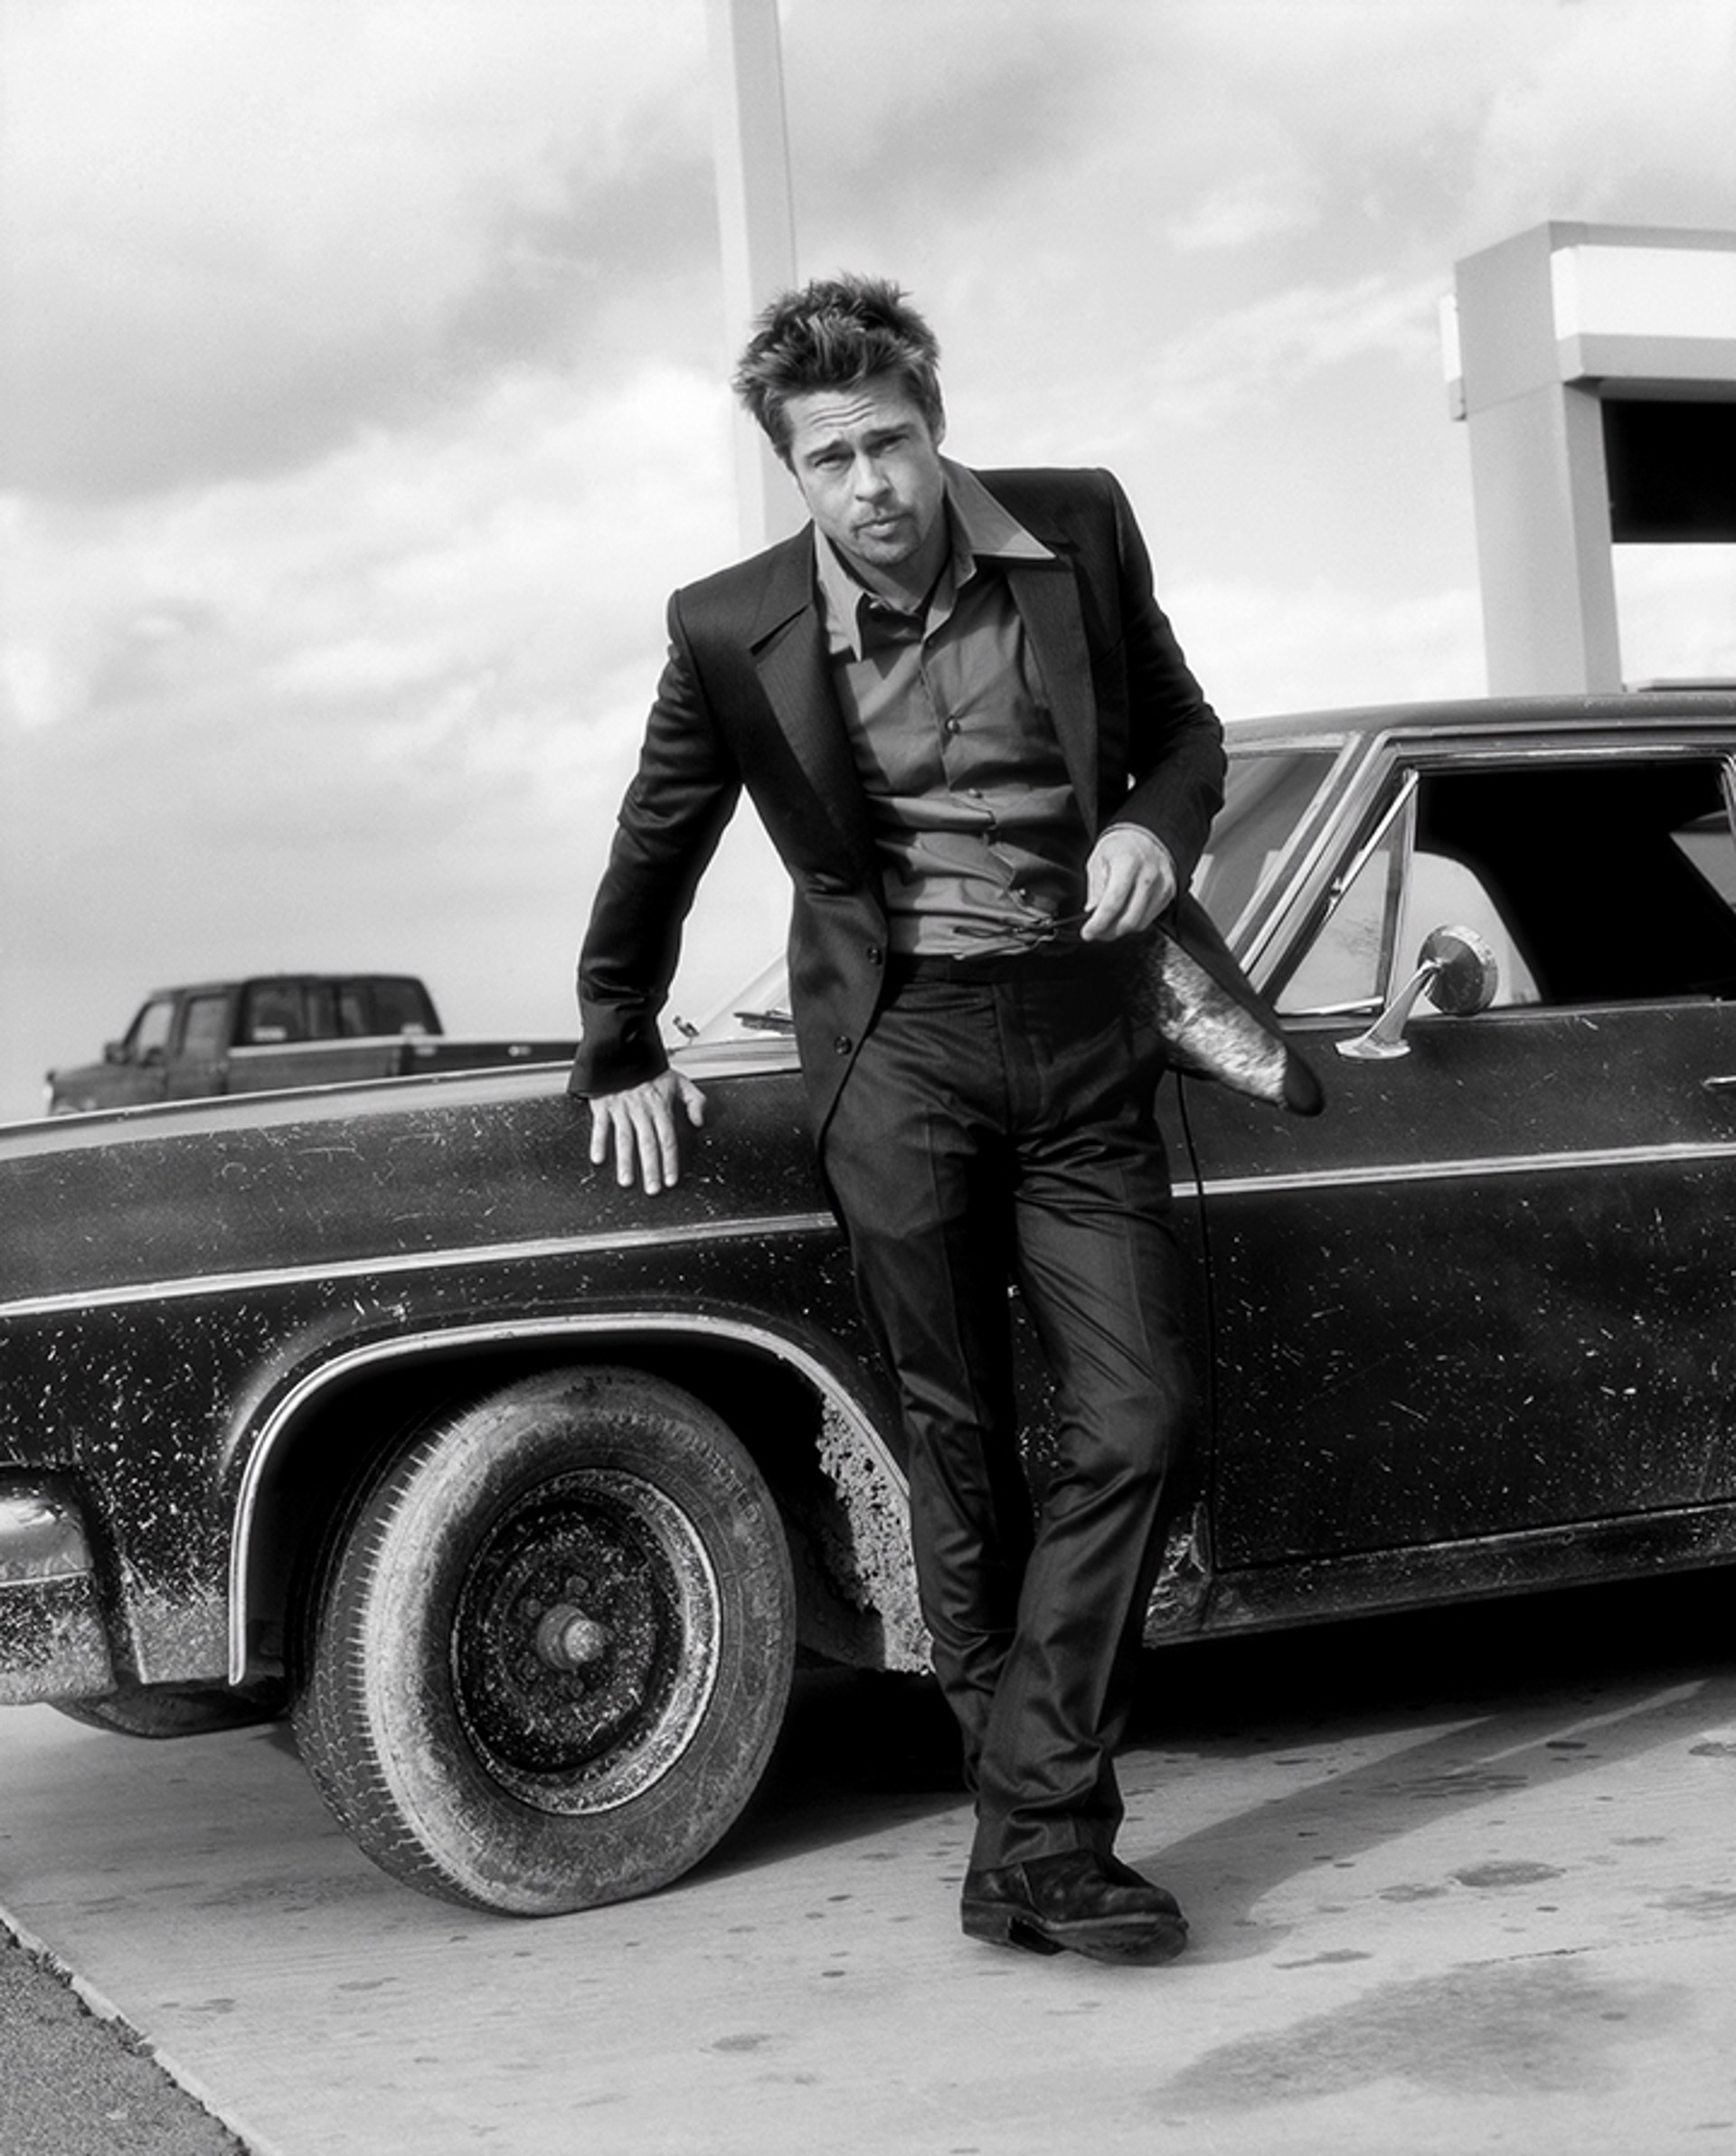 05009 Brad Pitt Against the Blue Car Without Sunglasses F23 BW by Timothy White